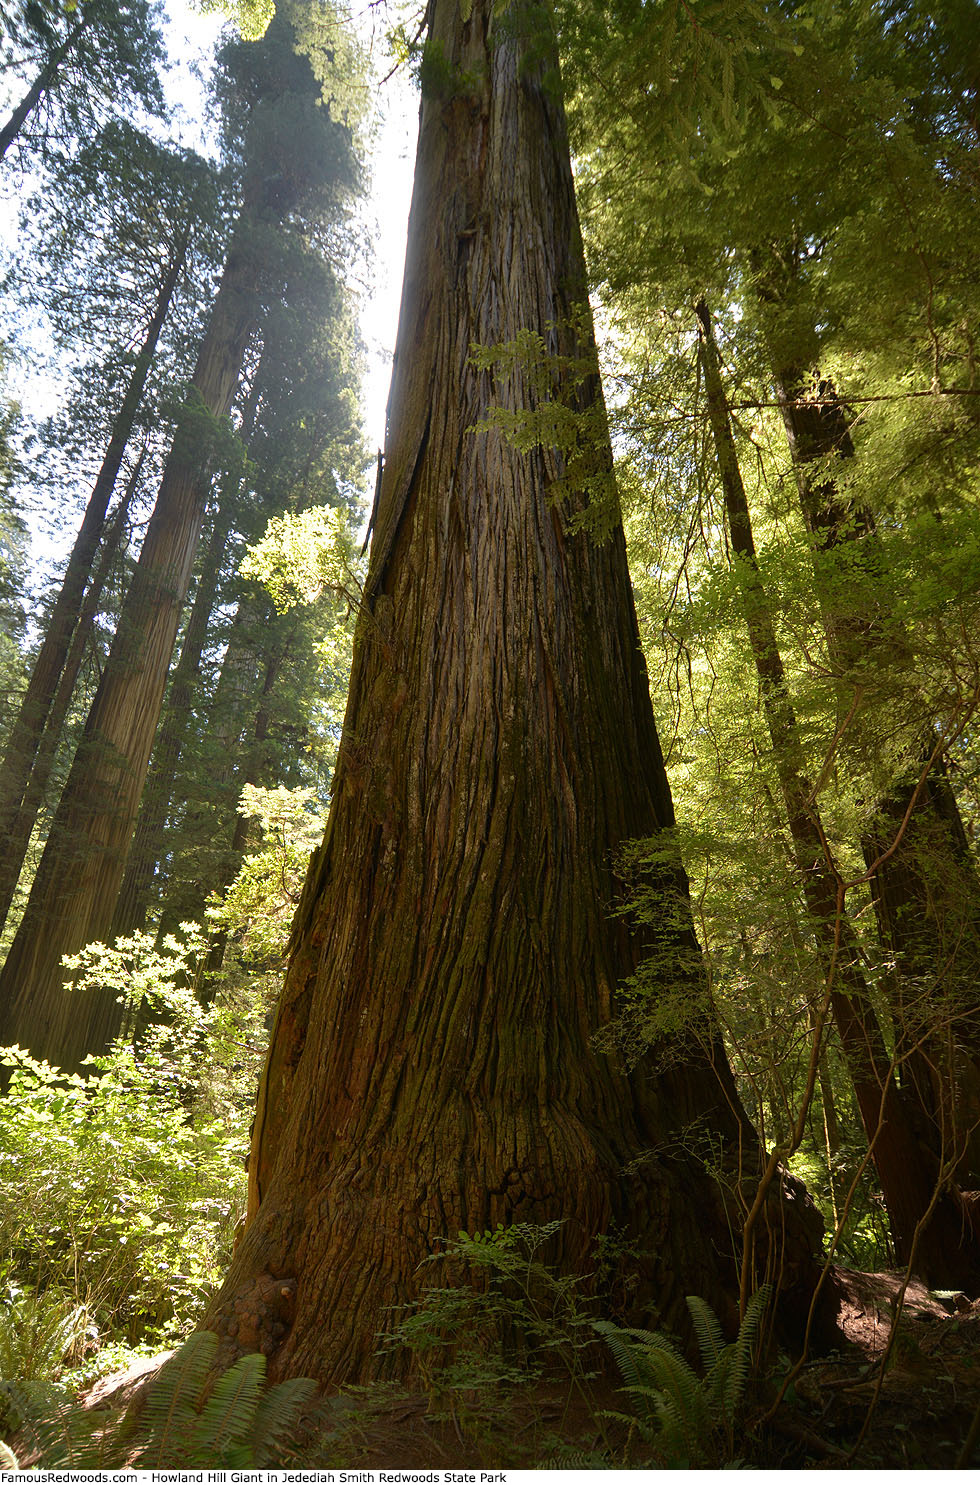 Jedediah Smith Redwoods State Park - Howland Hill Giant Tree